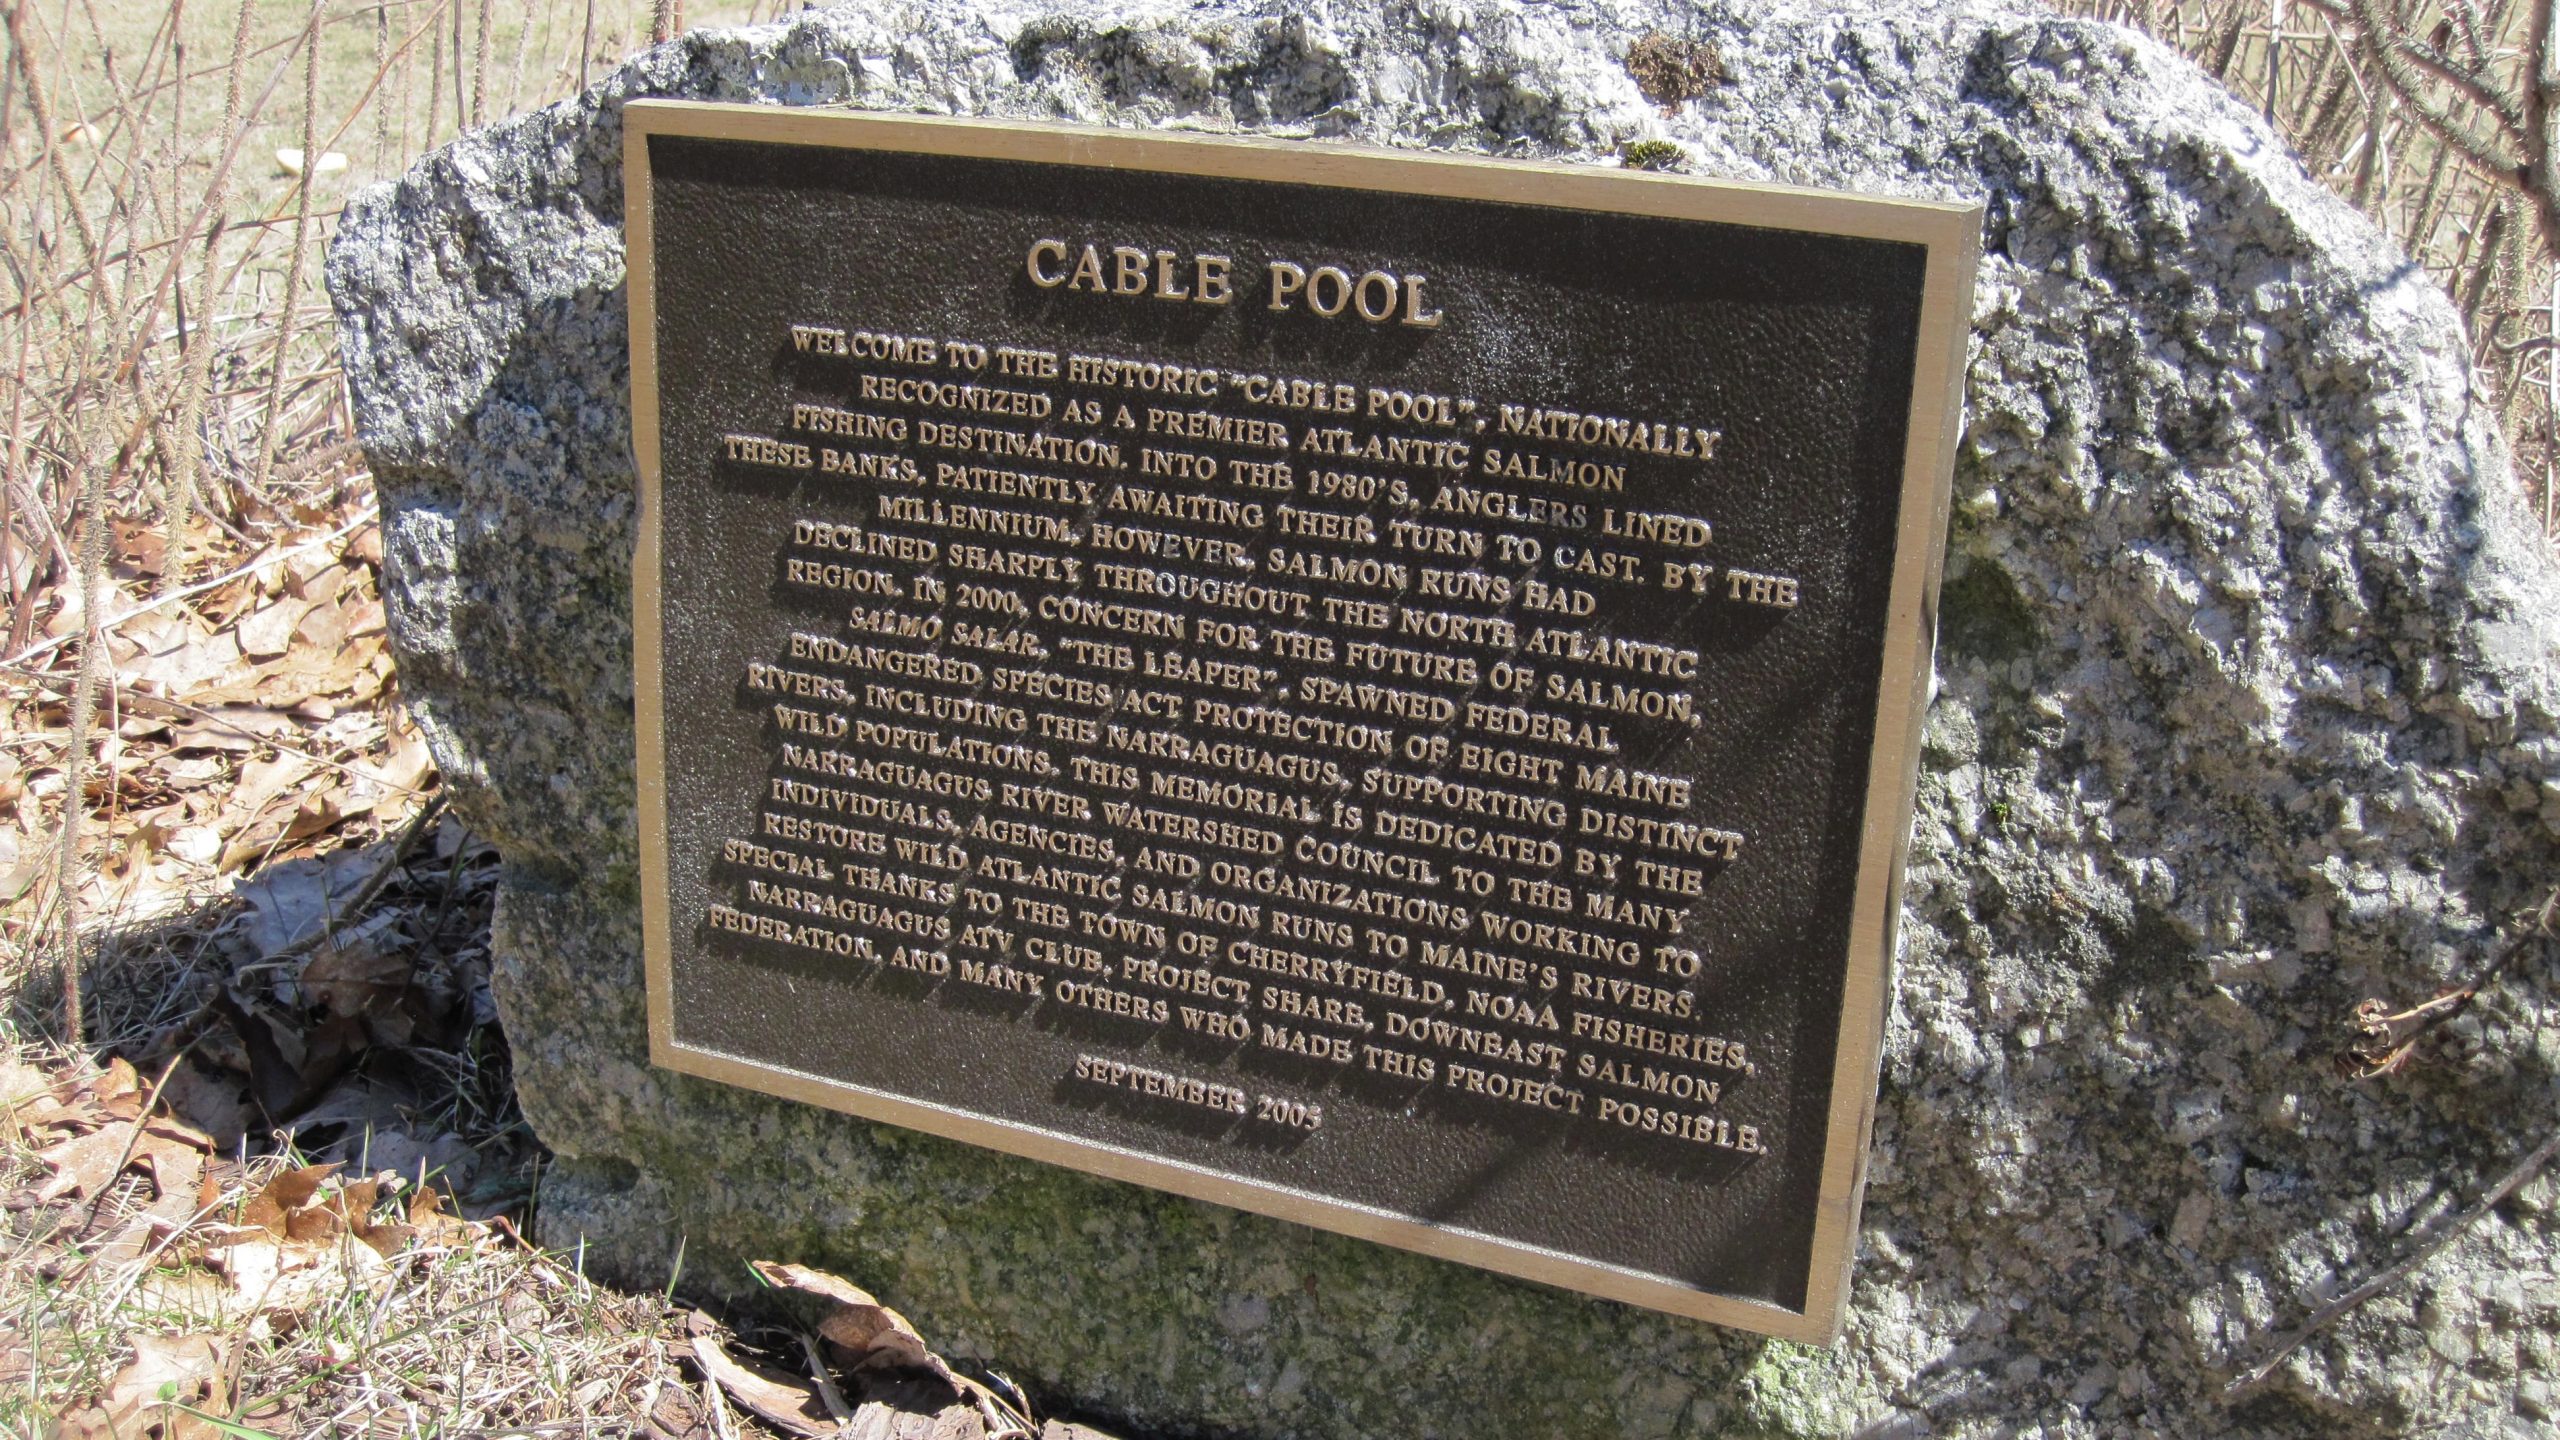 A plaque on the fabled Cable Pool on the Narraguagus River in Maine. (© Bob Mallard)